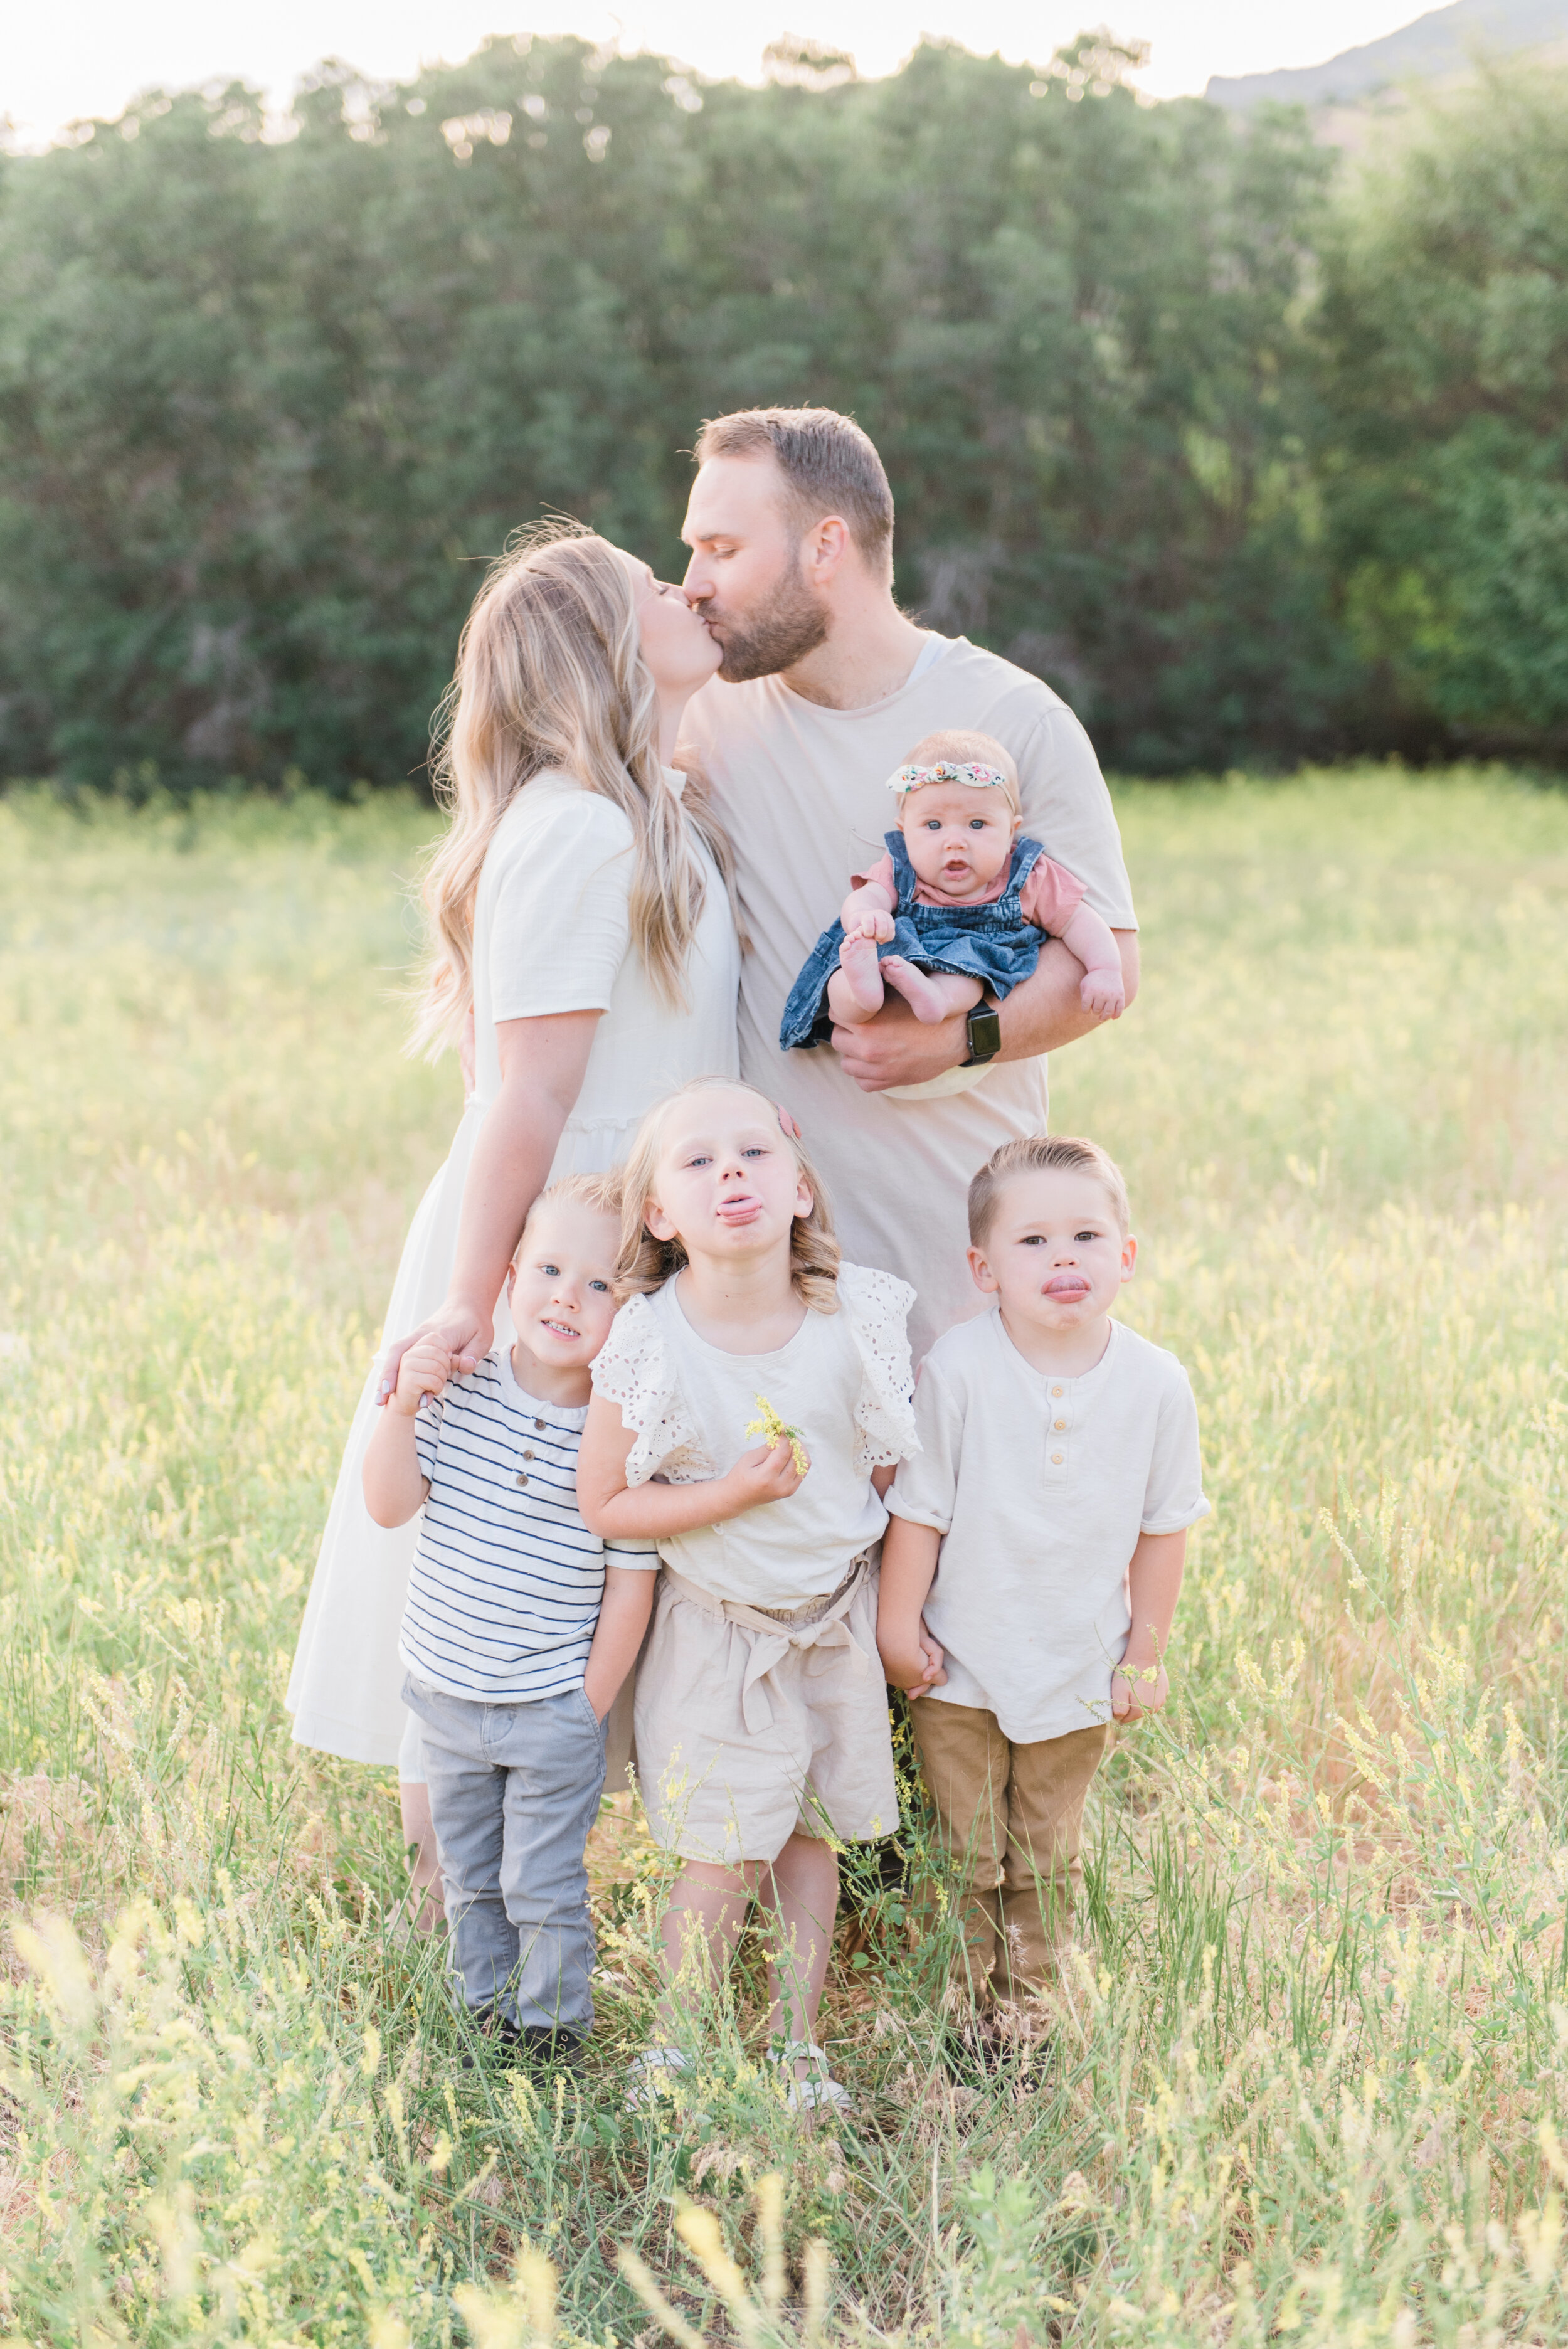  This photo by Jacquie Erickson captures the children's personalities while highlighting the love between the parents. Light outfits meadow photo location family of six sicking out tongues #candidphoto #familyofsixphotos #lightfamilyoutfits 